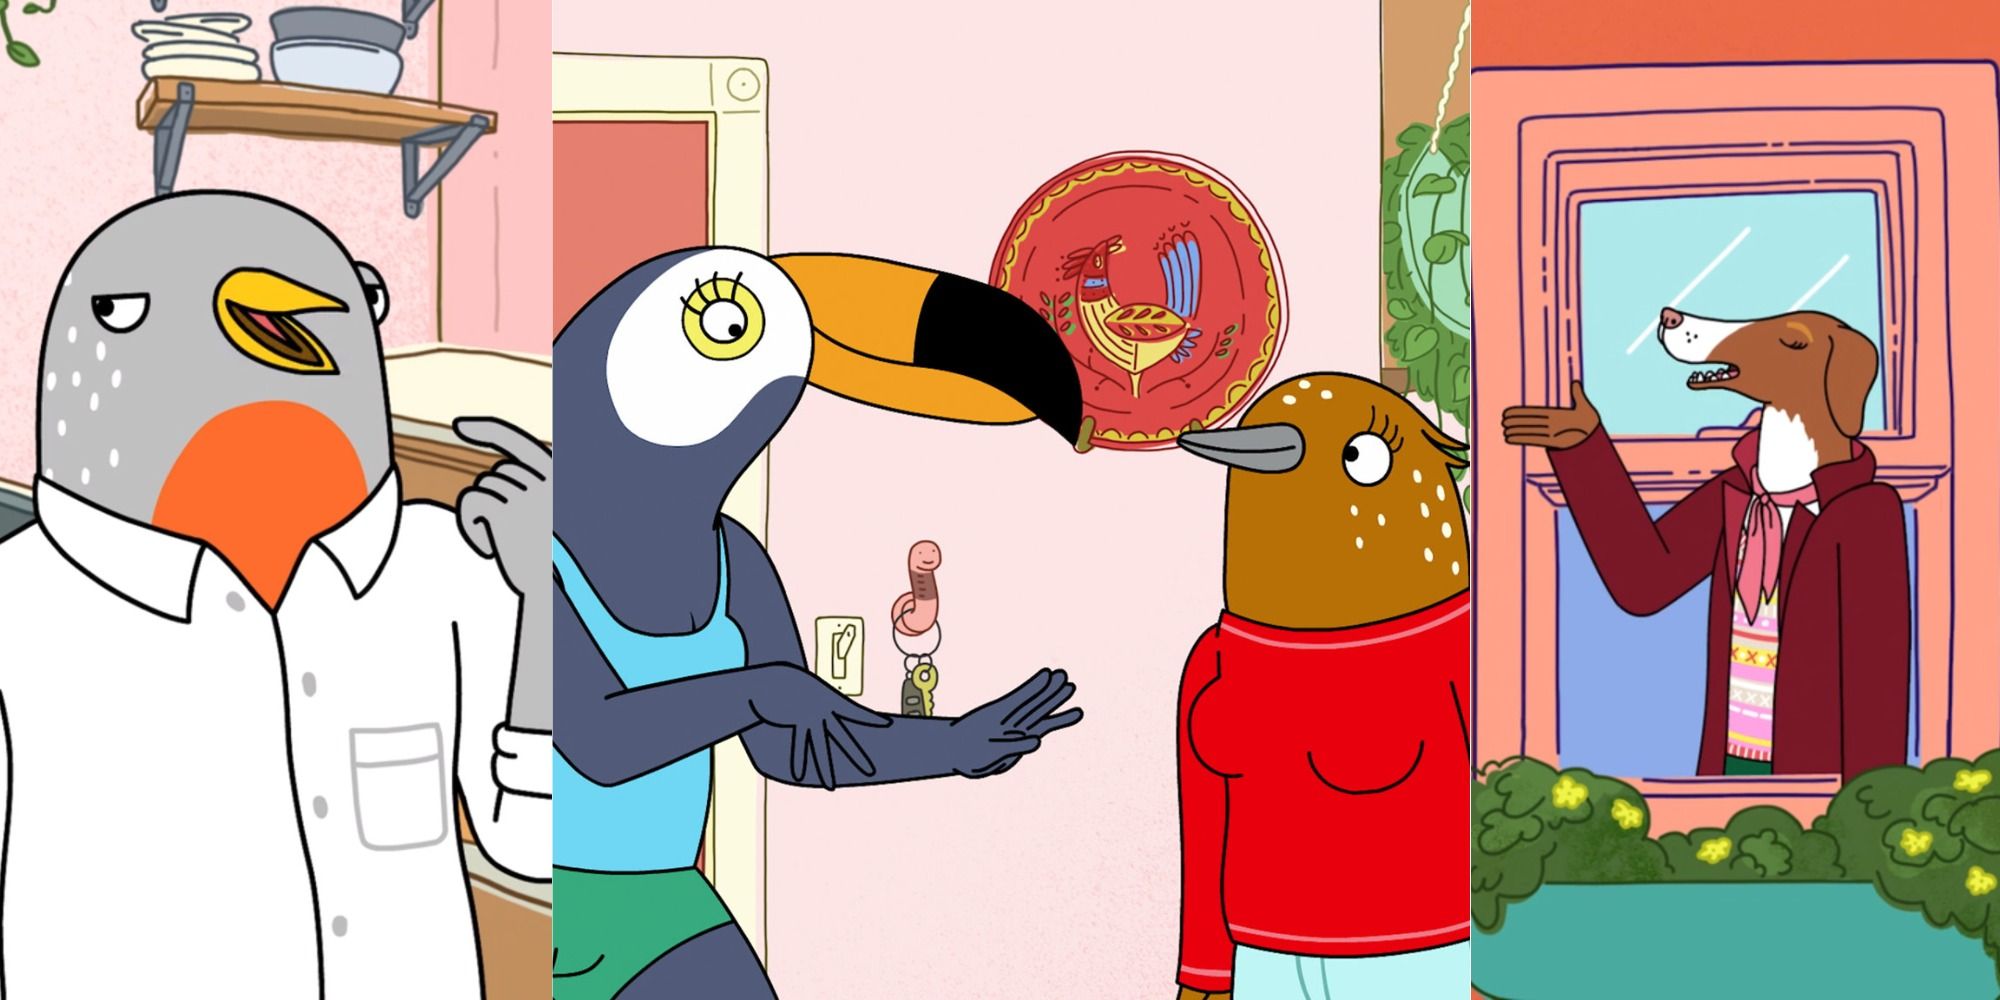 Three images side by side of Speckle, Tuca and Bertie, and Dapper Dog in Tuca and Bertie